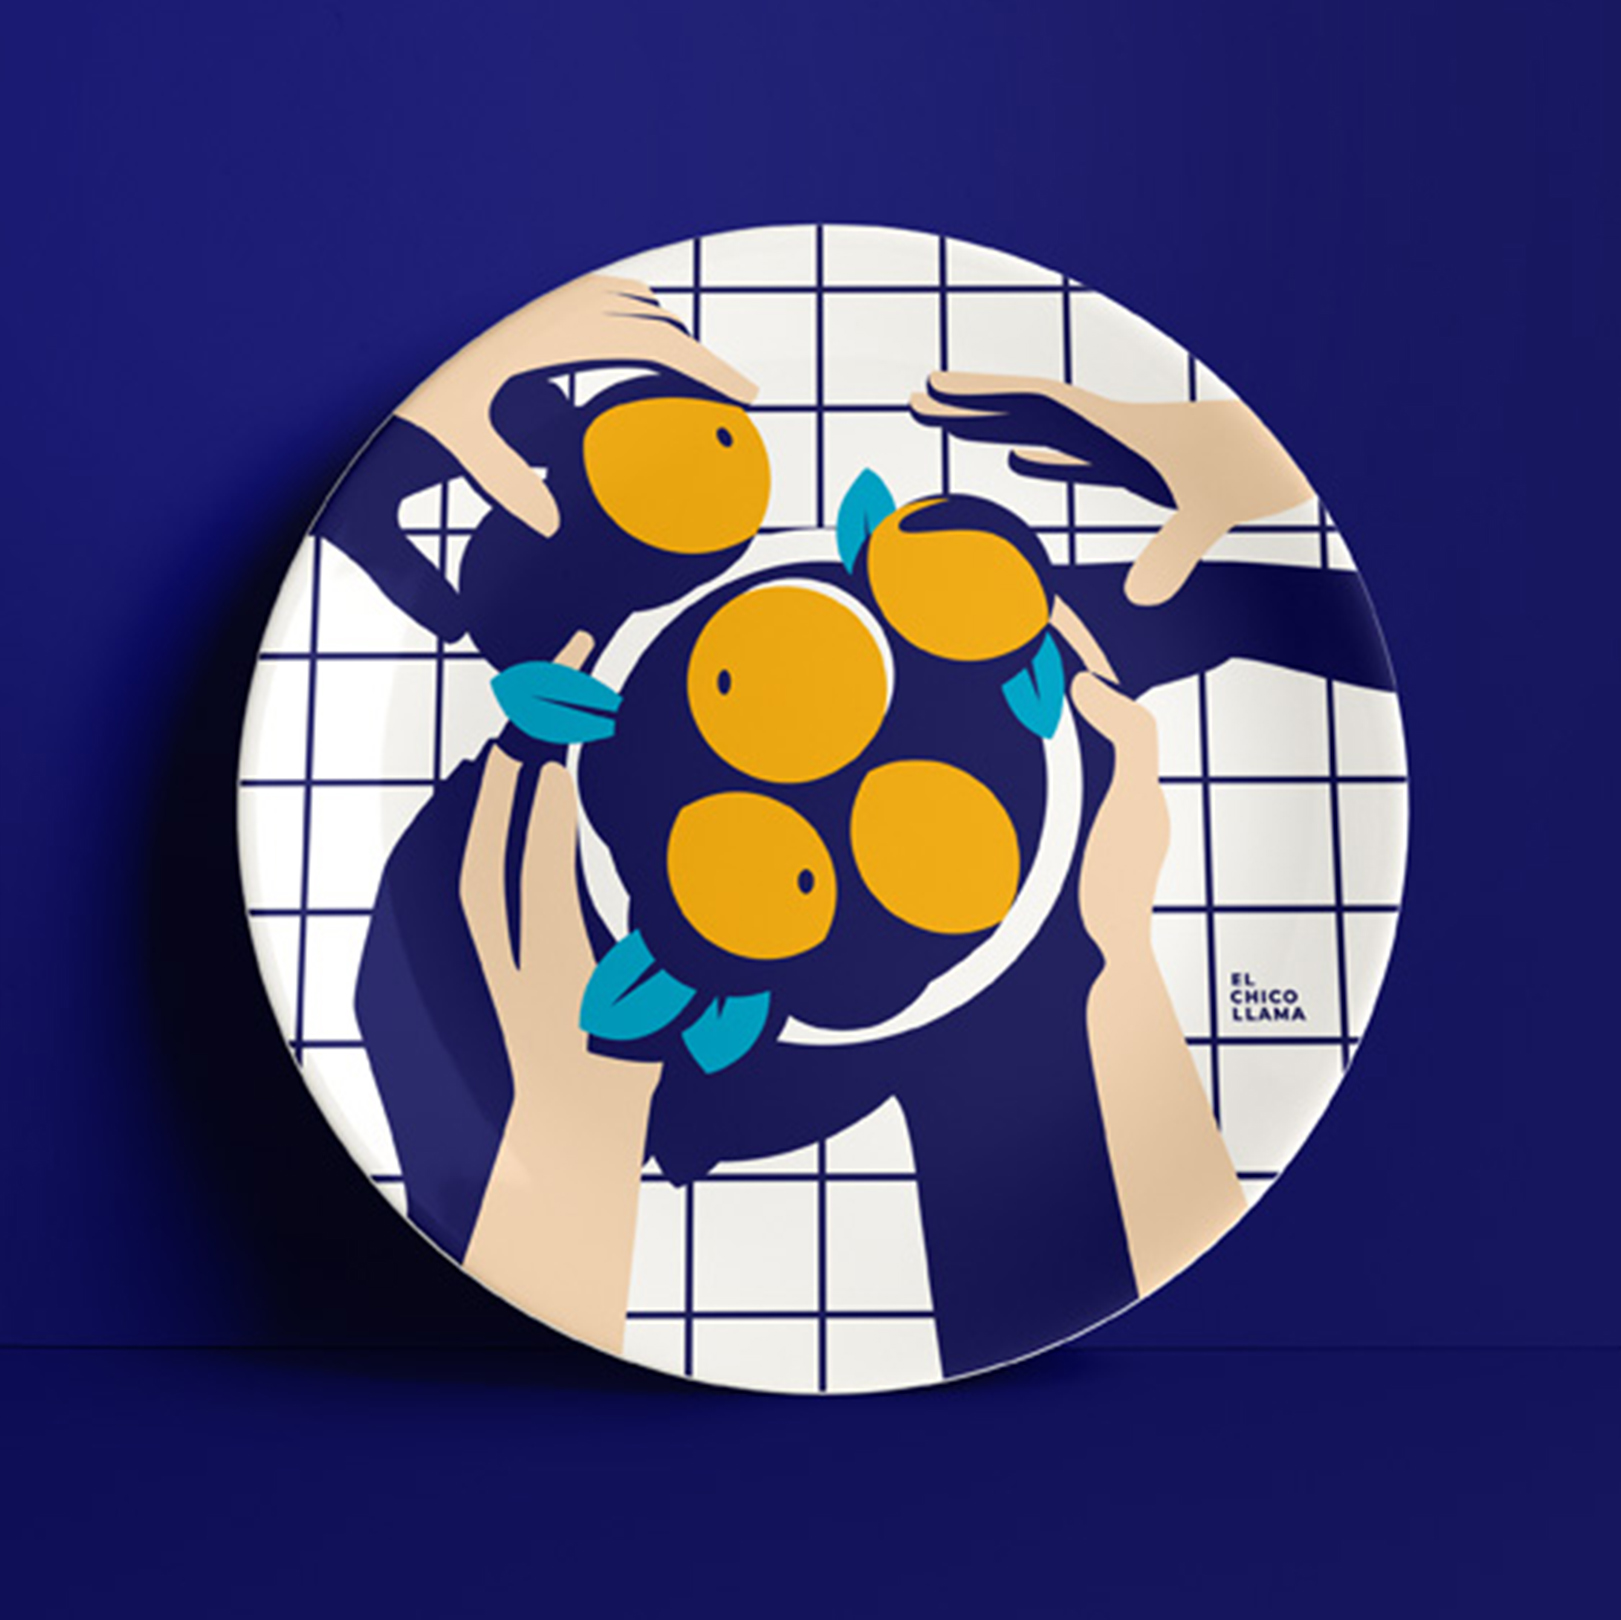 Dish design for Action Against Hunger solidarity tableware